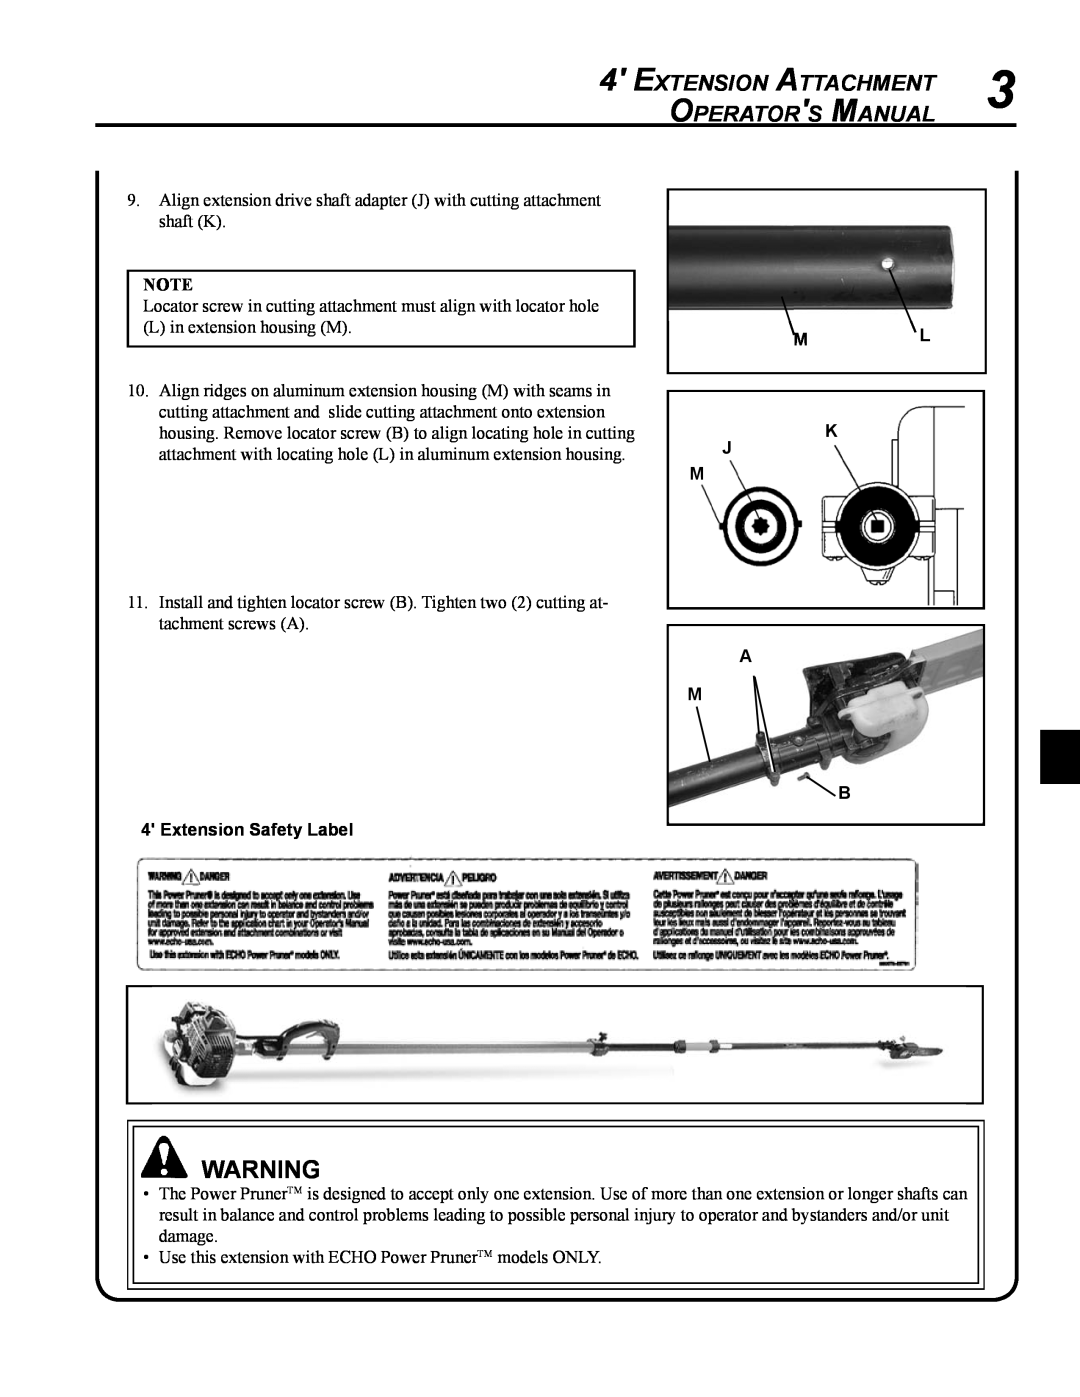 Echo PPT-2100/2400, PPT-280 X767000212, PPT-266/266H Extension Attachment, Operators Manual, Extension Safety Label, A M B 